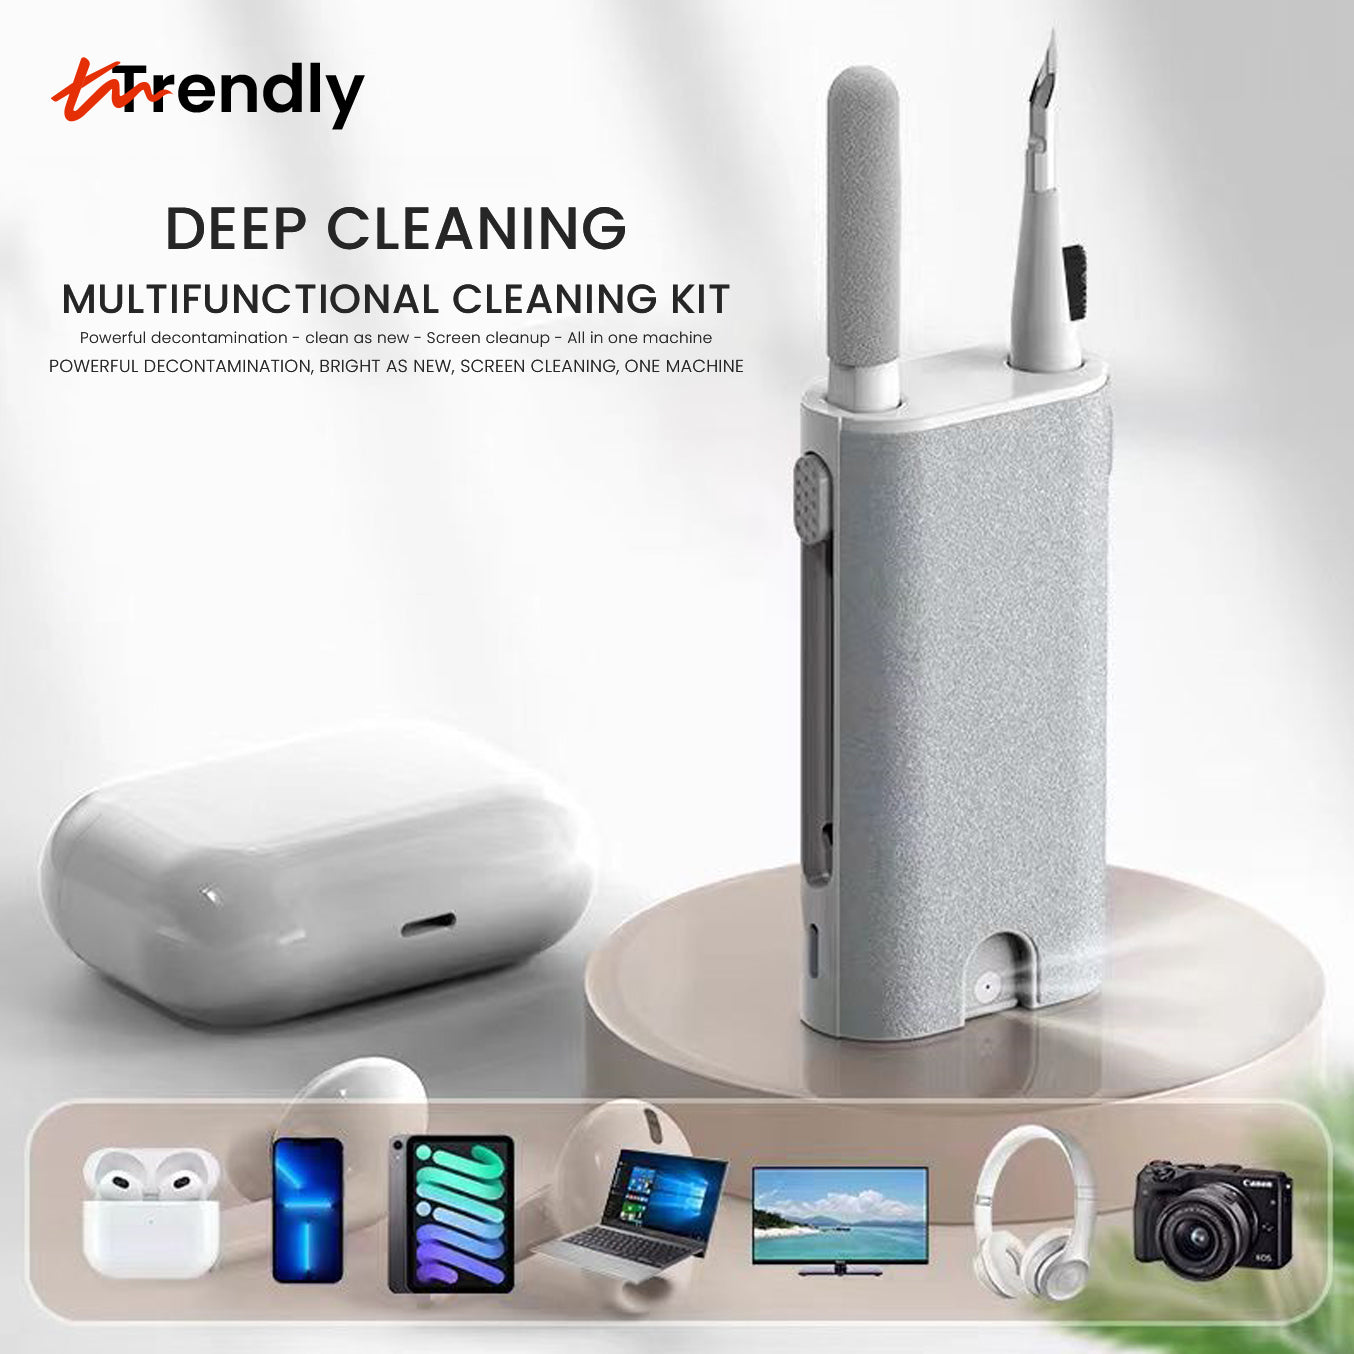 5 in 1 Multi functional Microfiber Spray + Cleaning Pen kit for All Devices